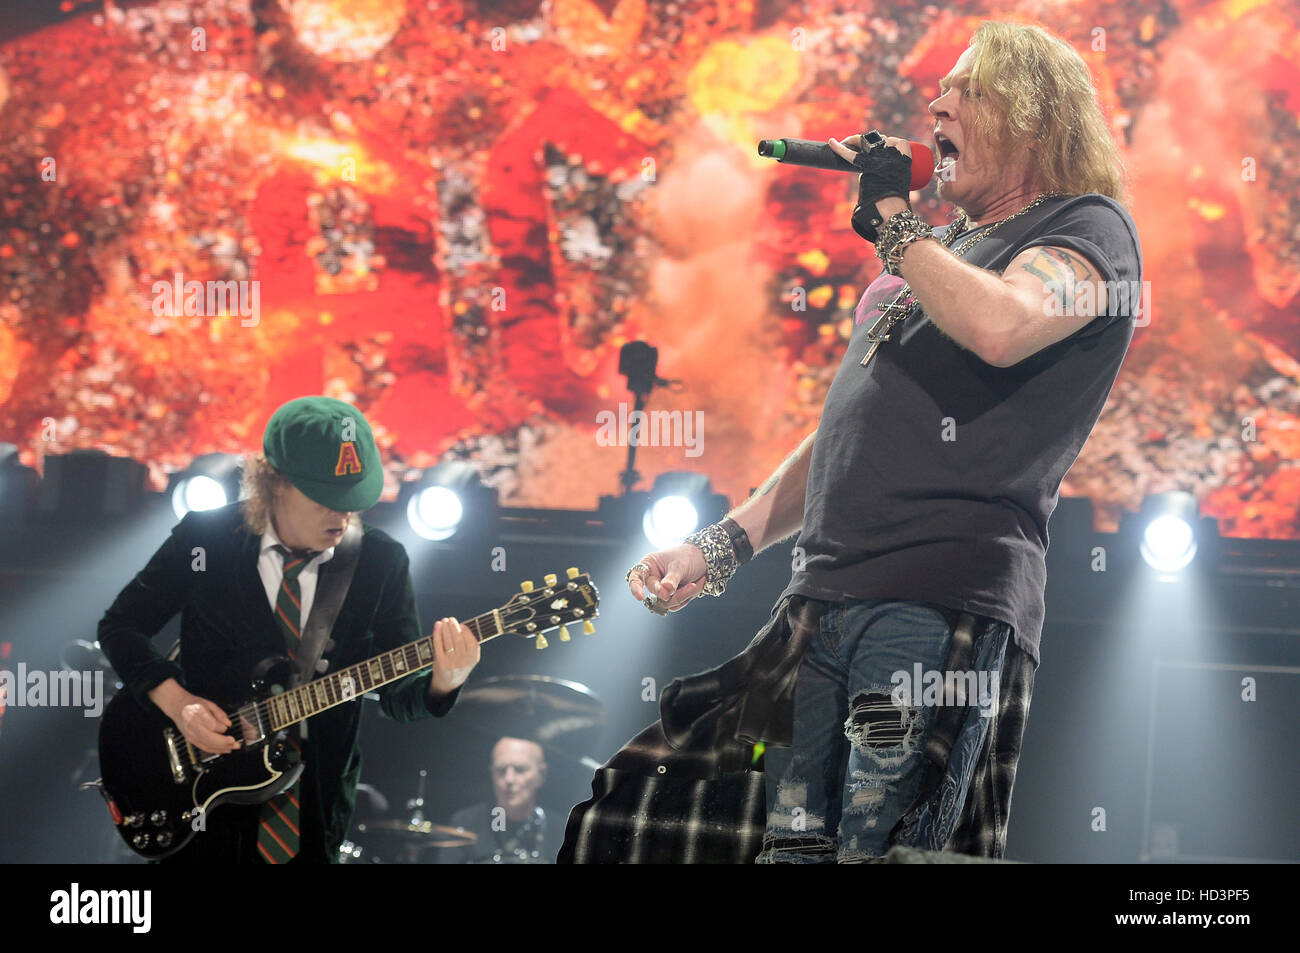 AC/DC perform live in concert Featuring: Axl Rose, Angus Young Where:  Sunrise, Florida, United States When: 31 Aug 2016 Stock Photo - Alamy